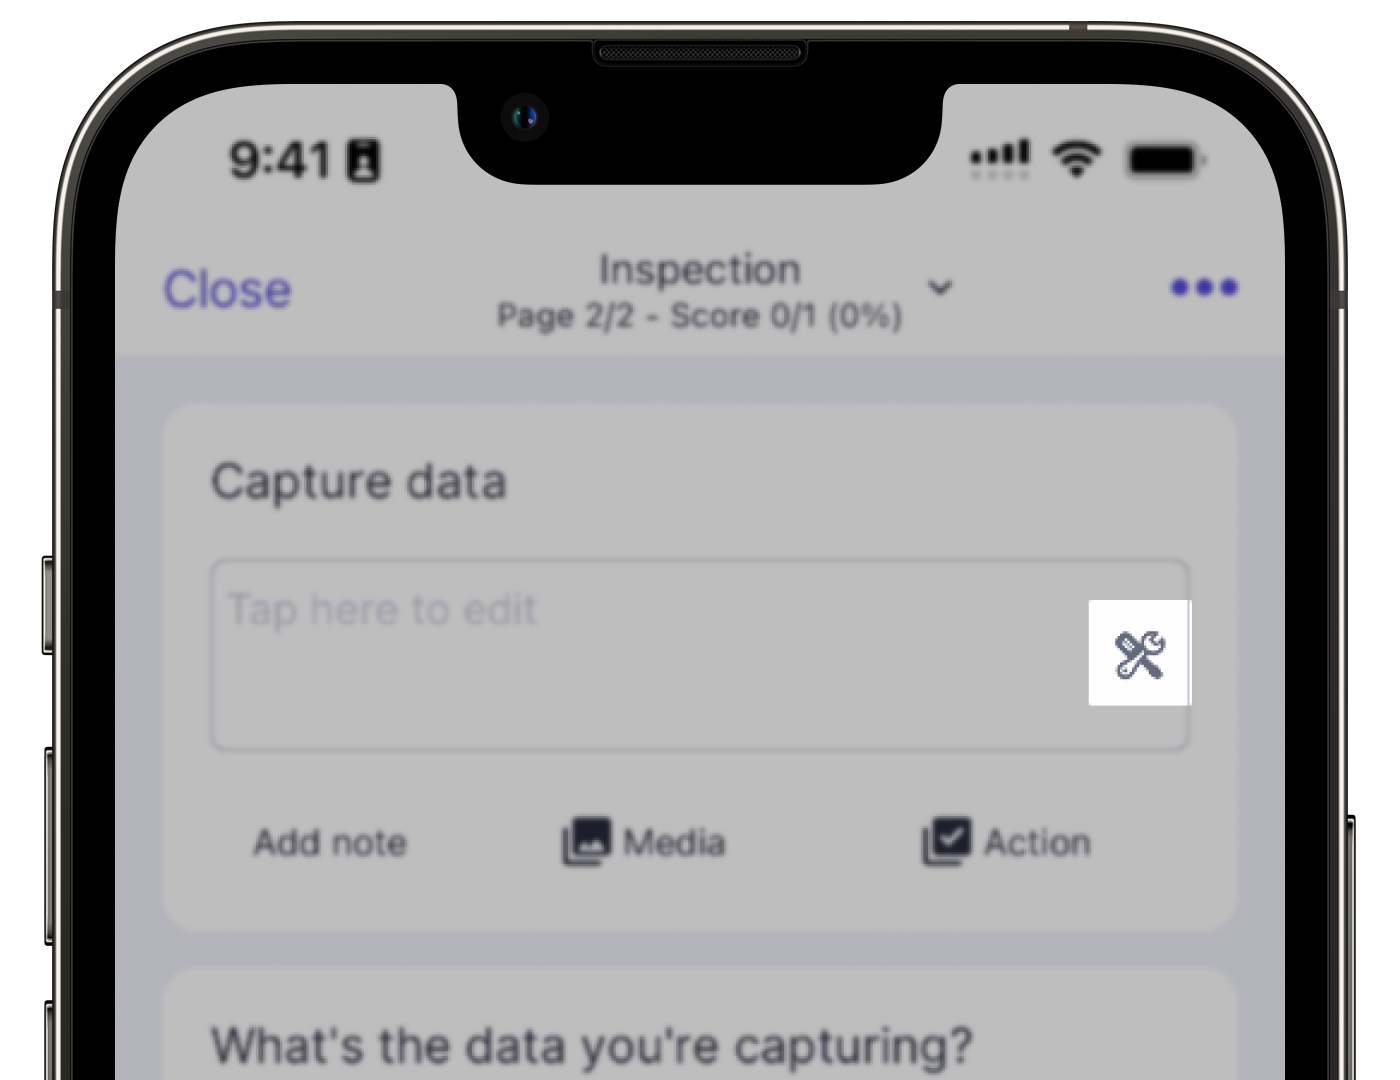 View available data capture options in inspections on the mobile app.